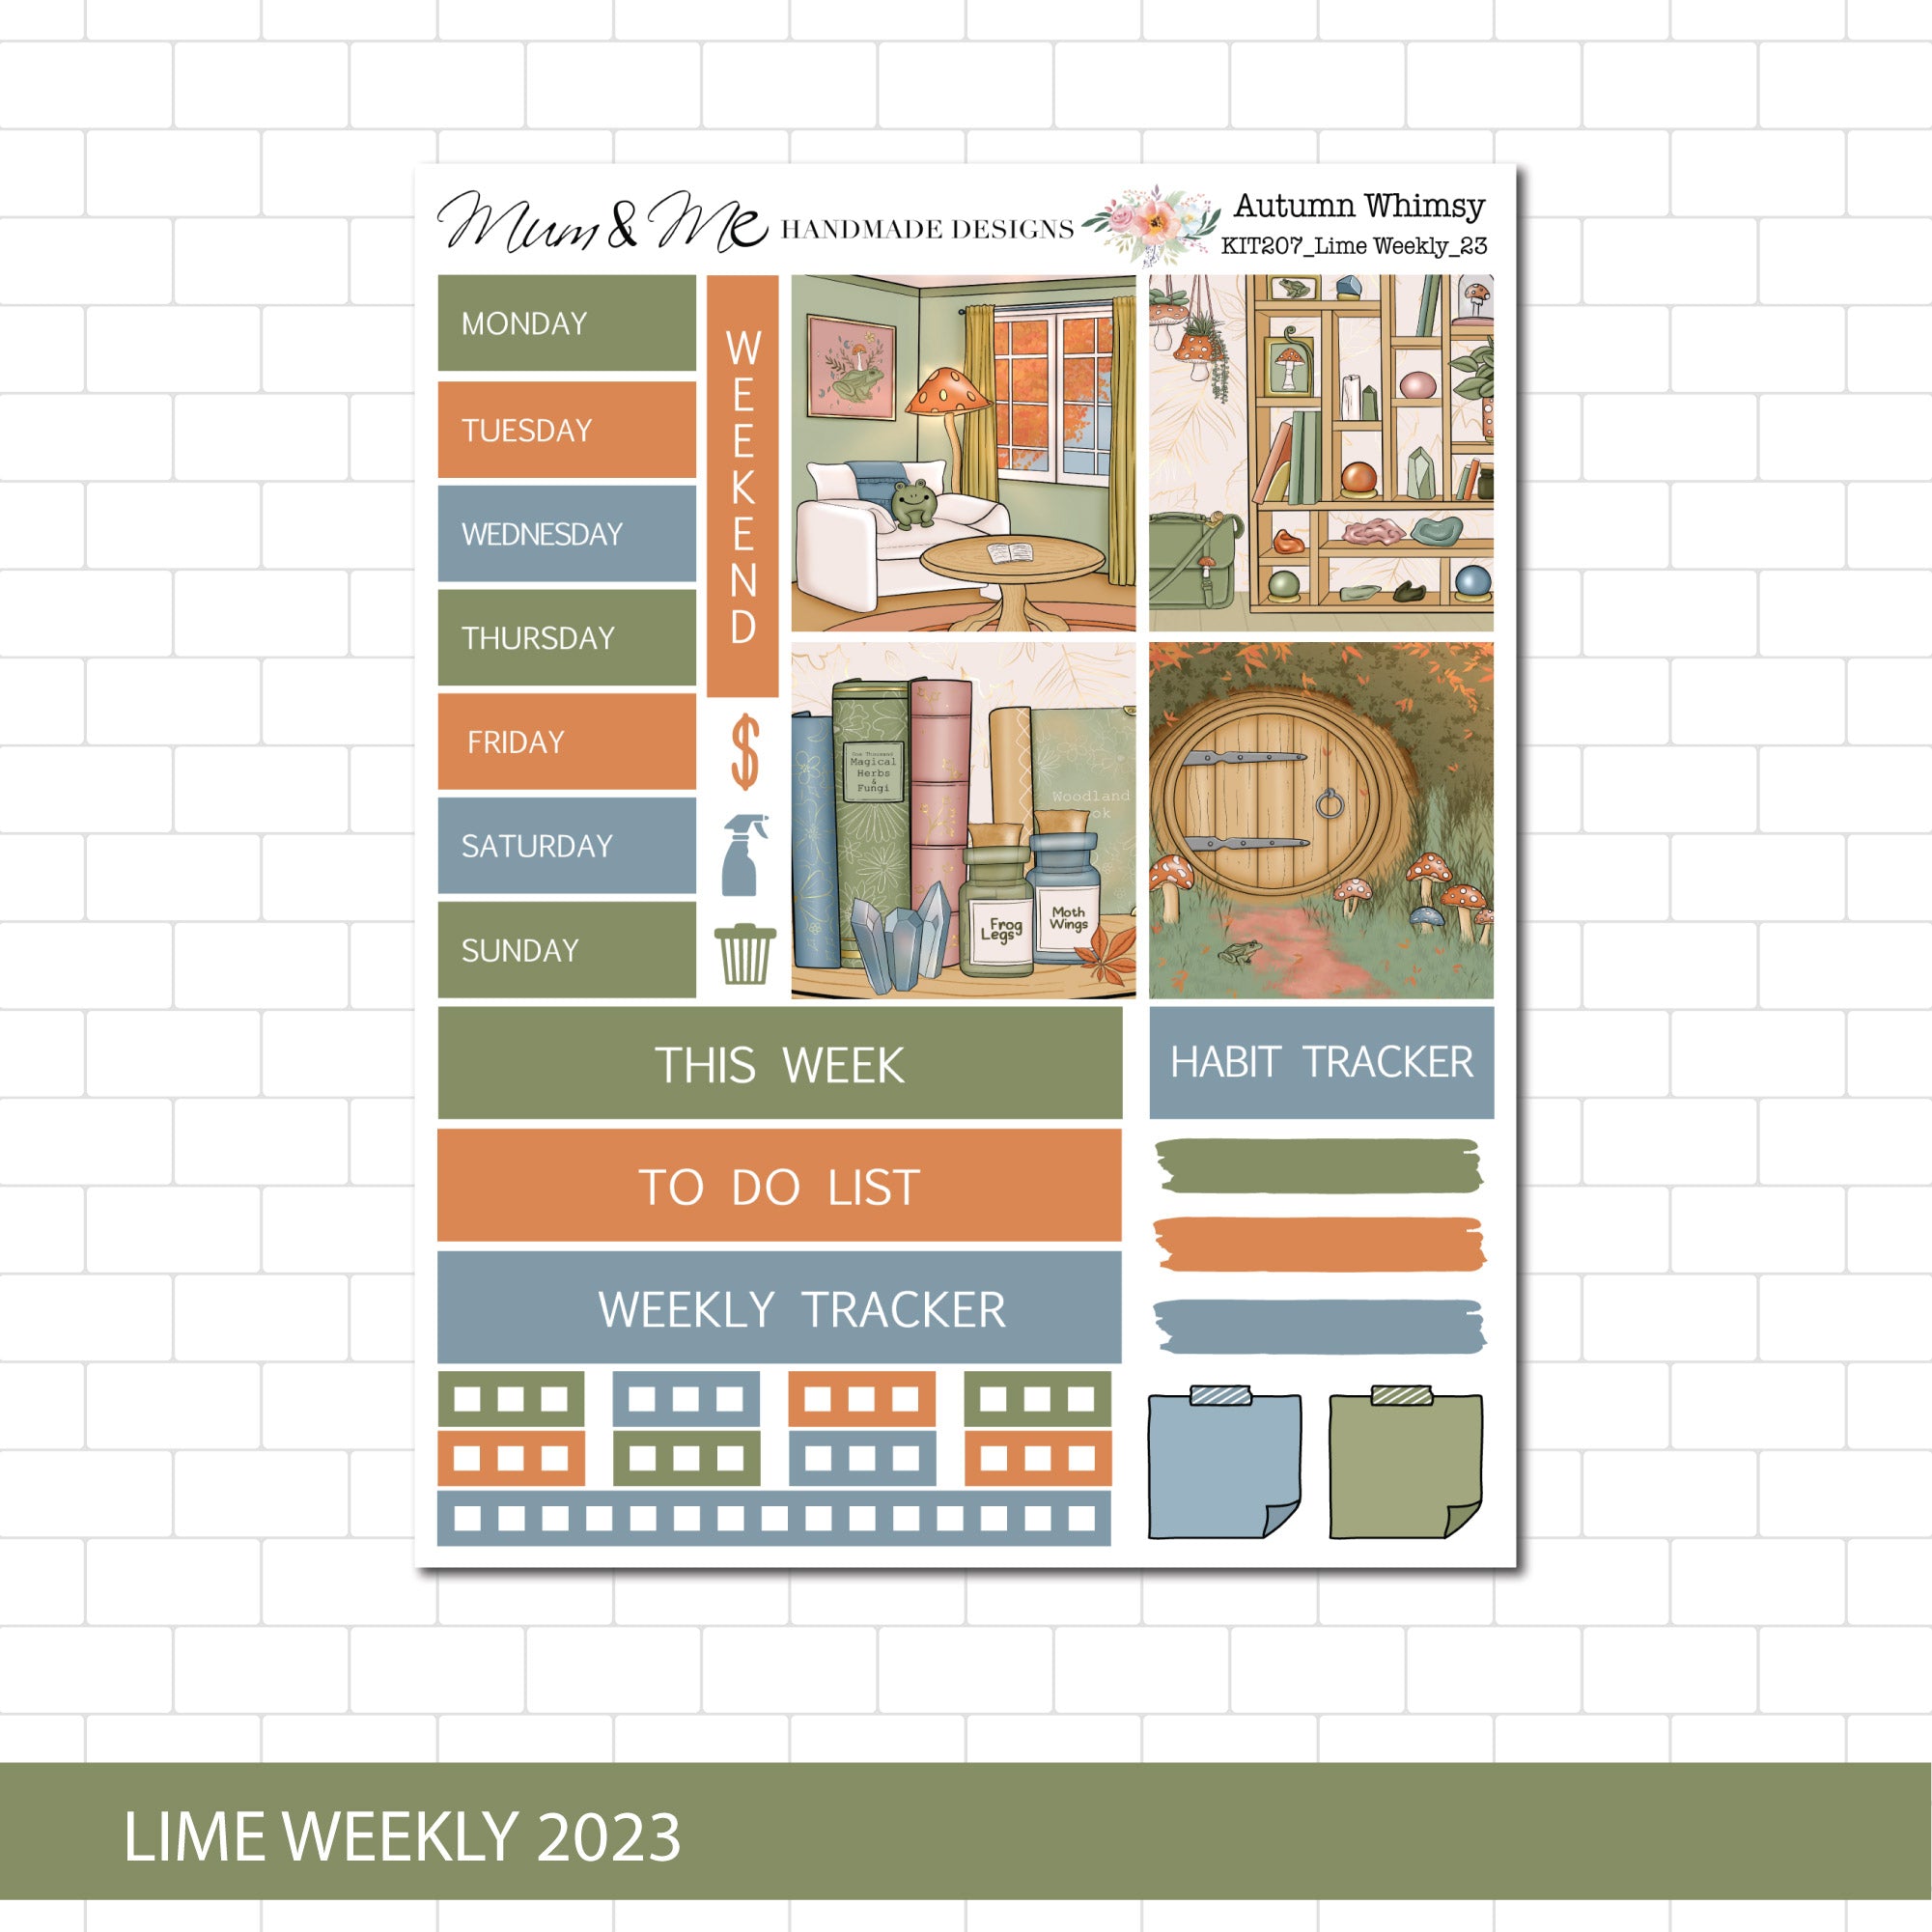 Lime Weekly: Autumn Whimsy